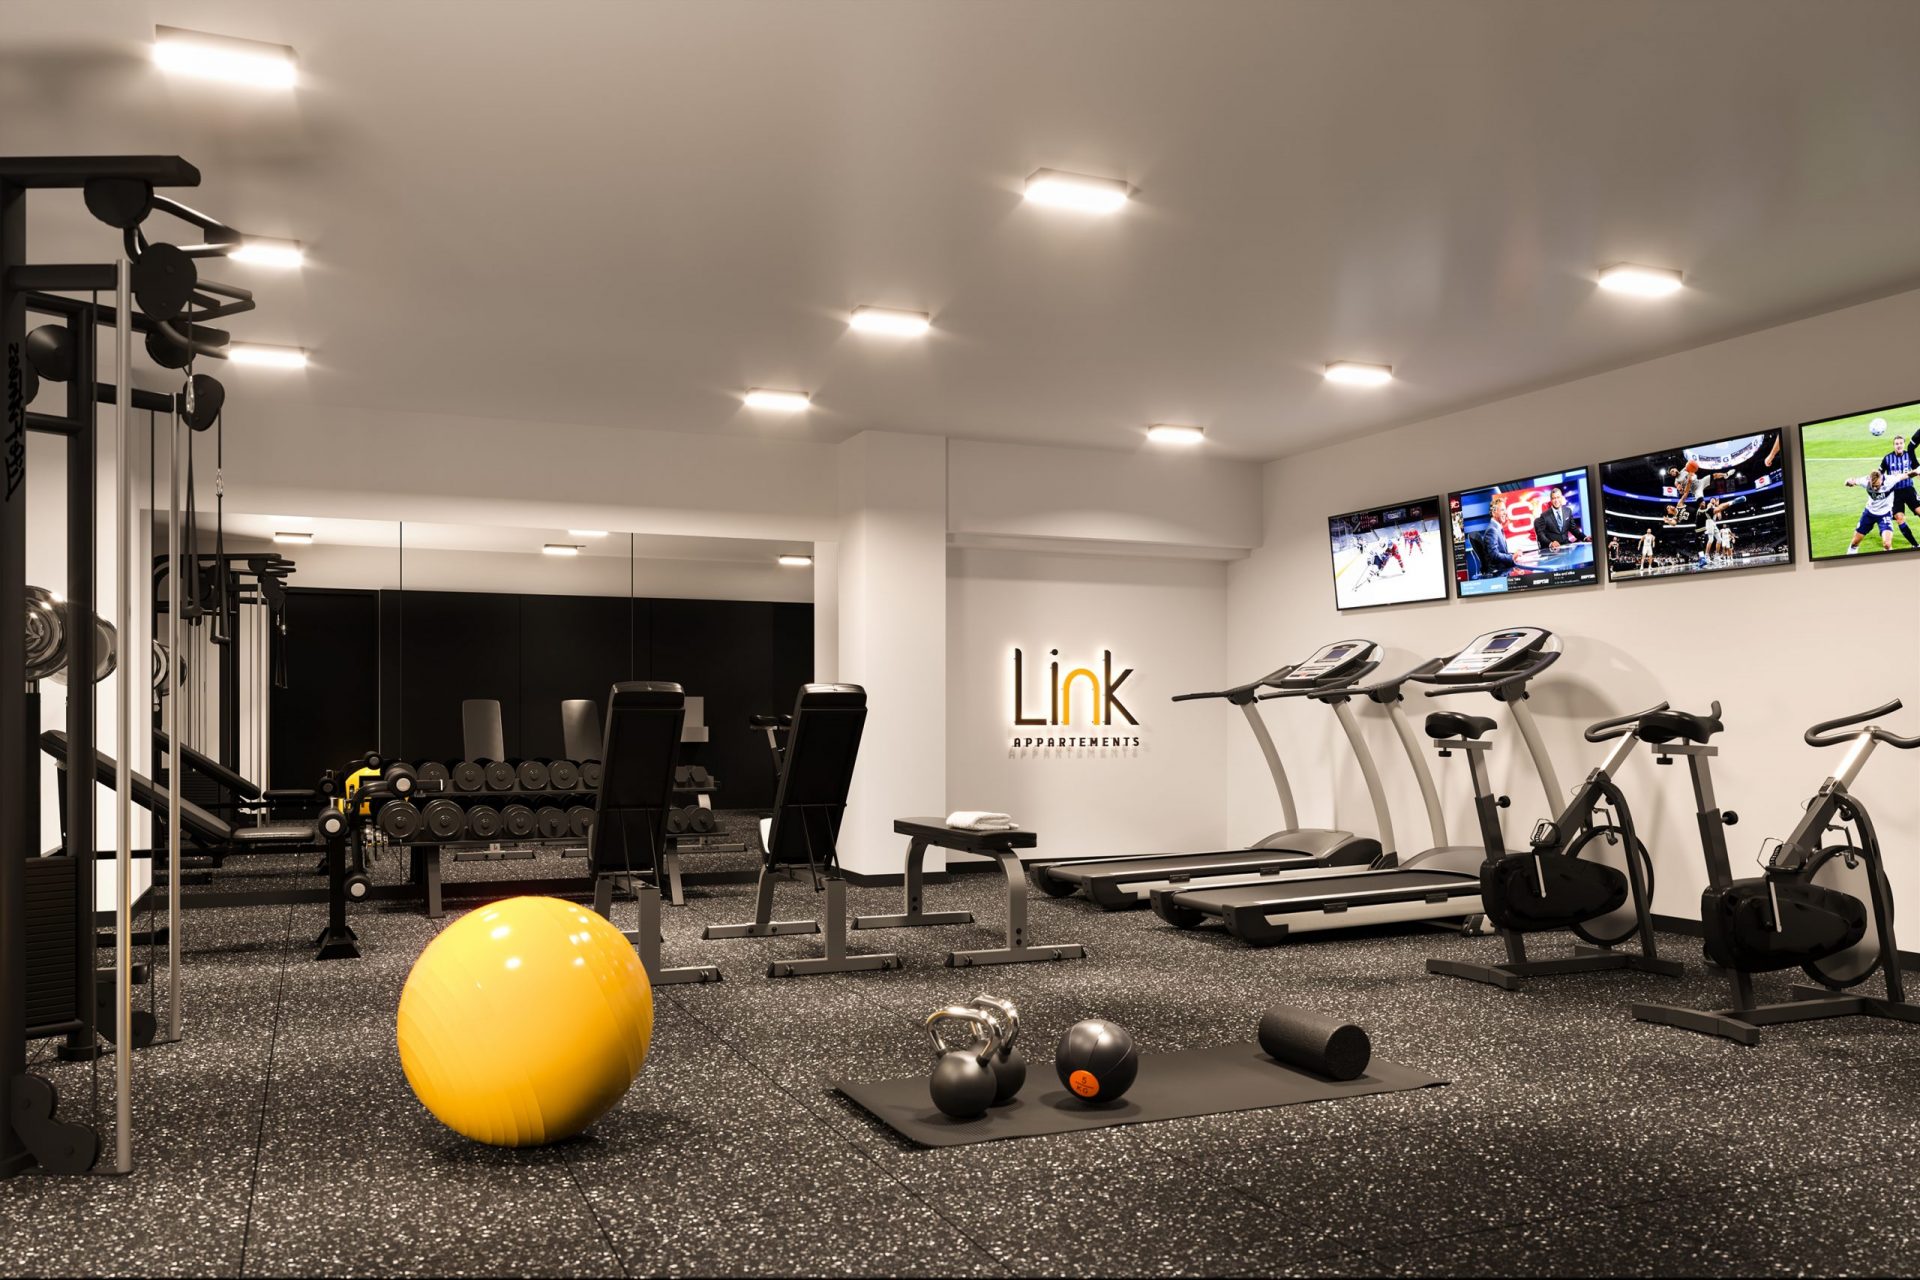 the training room of Link Apartments